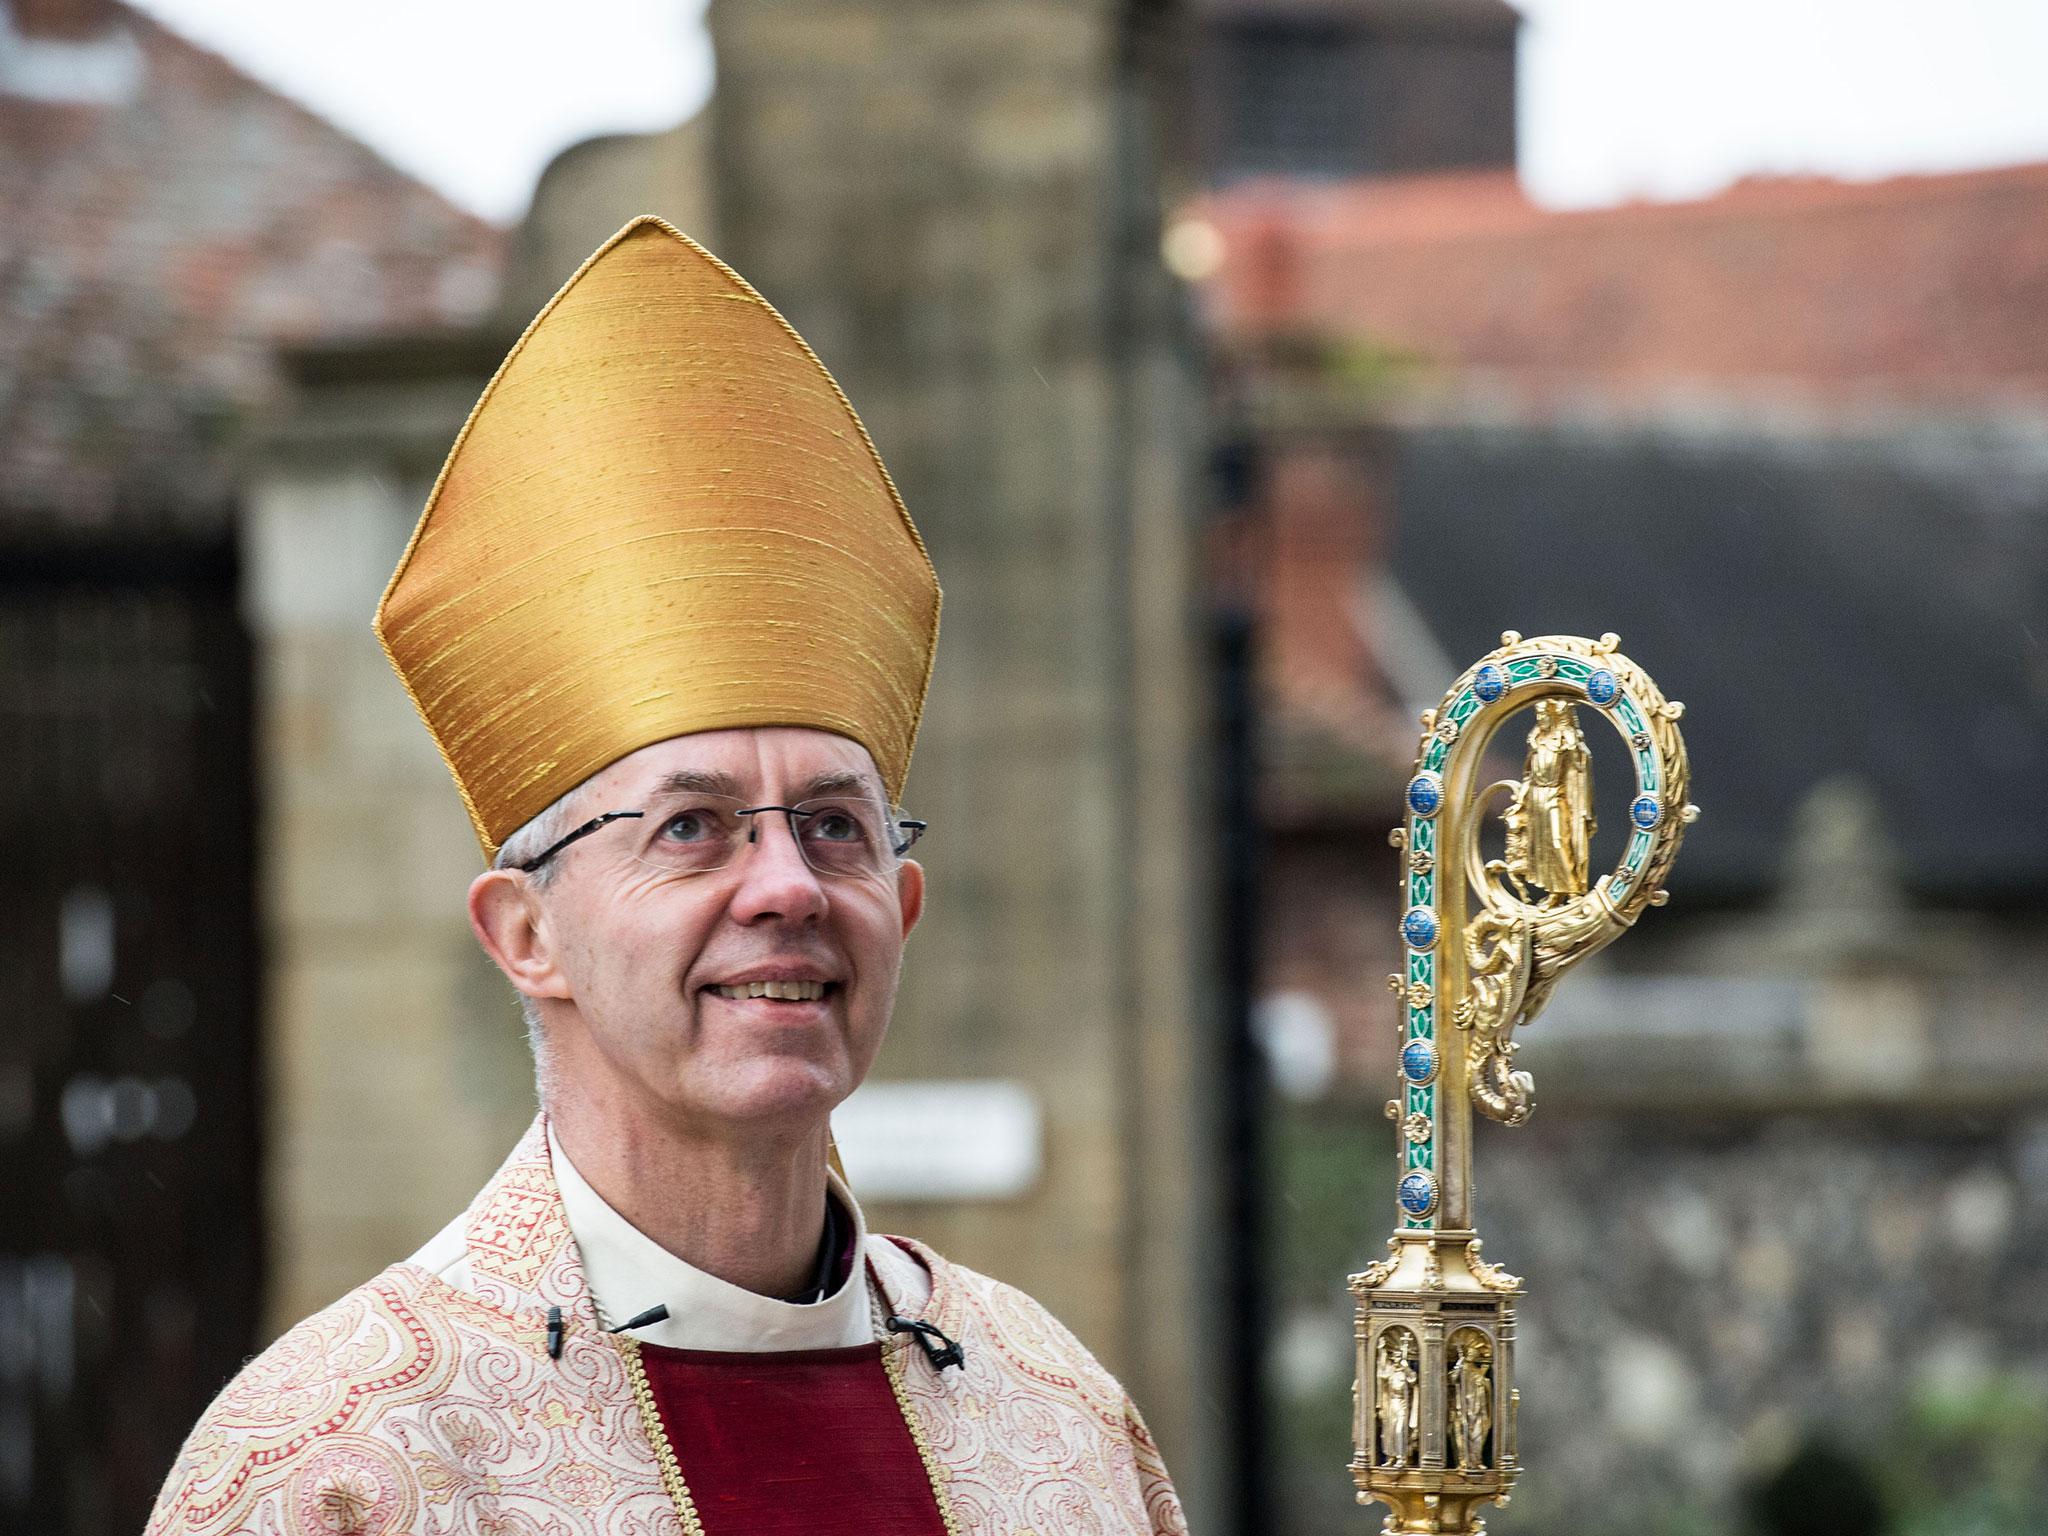 Welby previously condemned the Republican’s plans to ban Muslims from the US as 'not a christian thing to do'